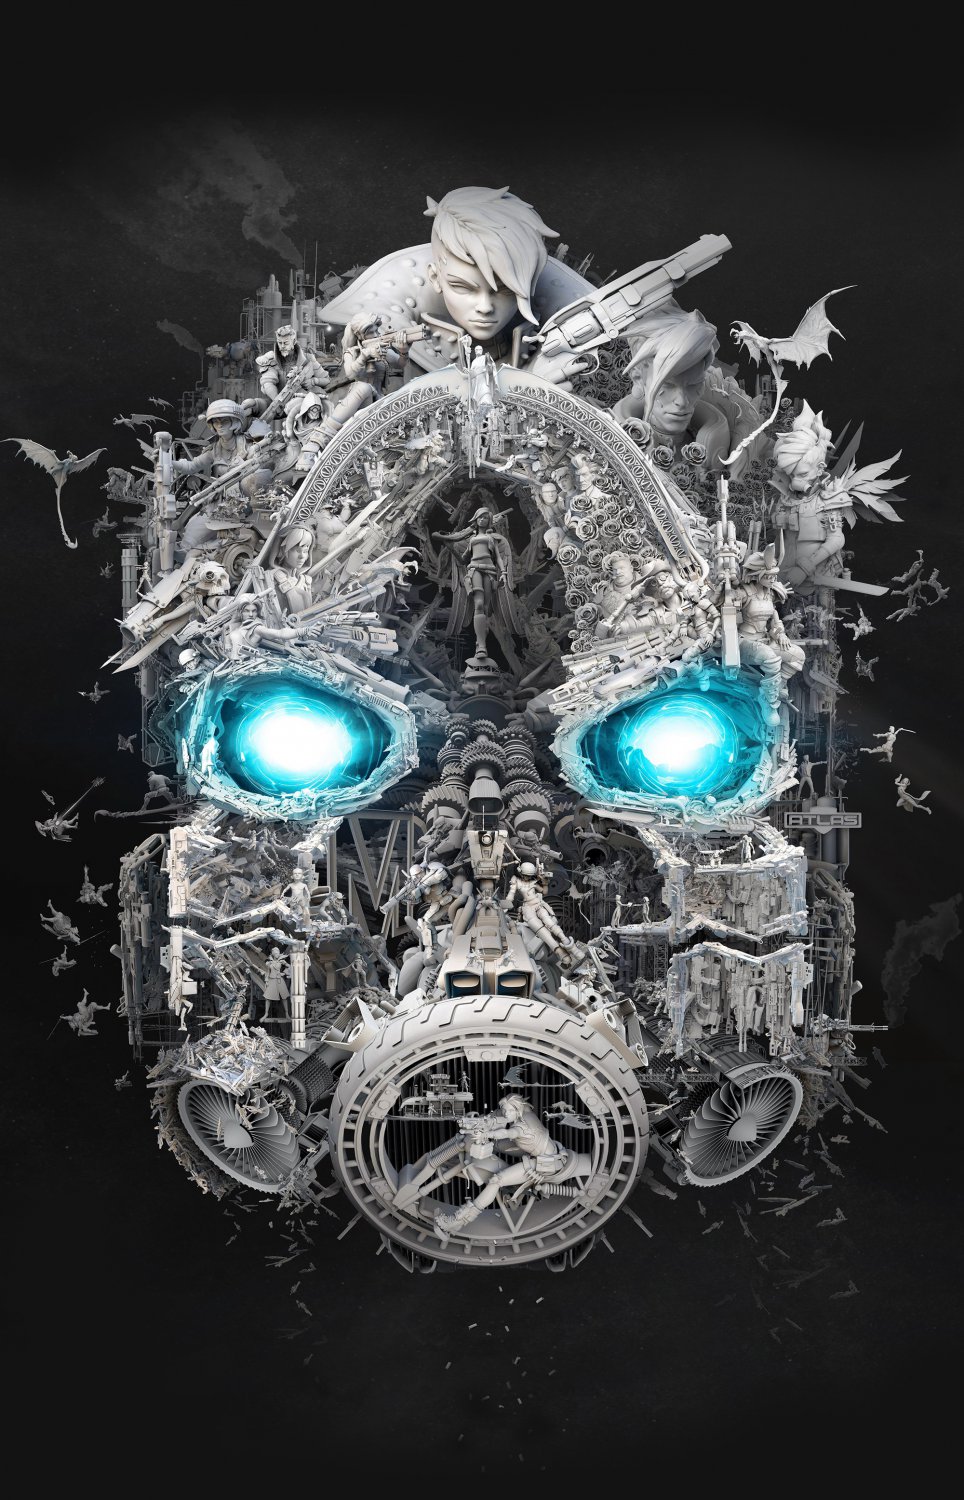 Borderlands 3 Game 13"x19" (32cm/49cm) Polyester Fabric Poster